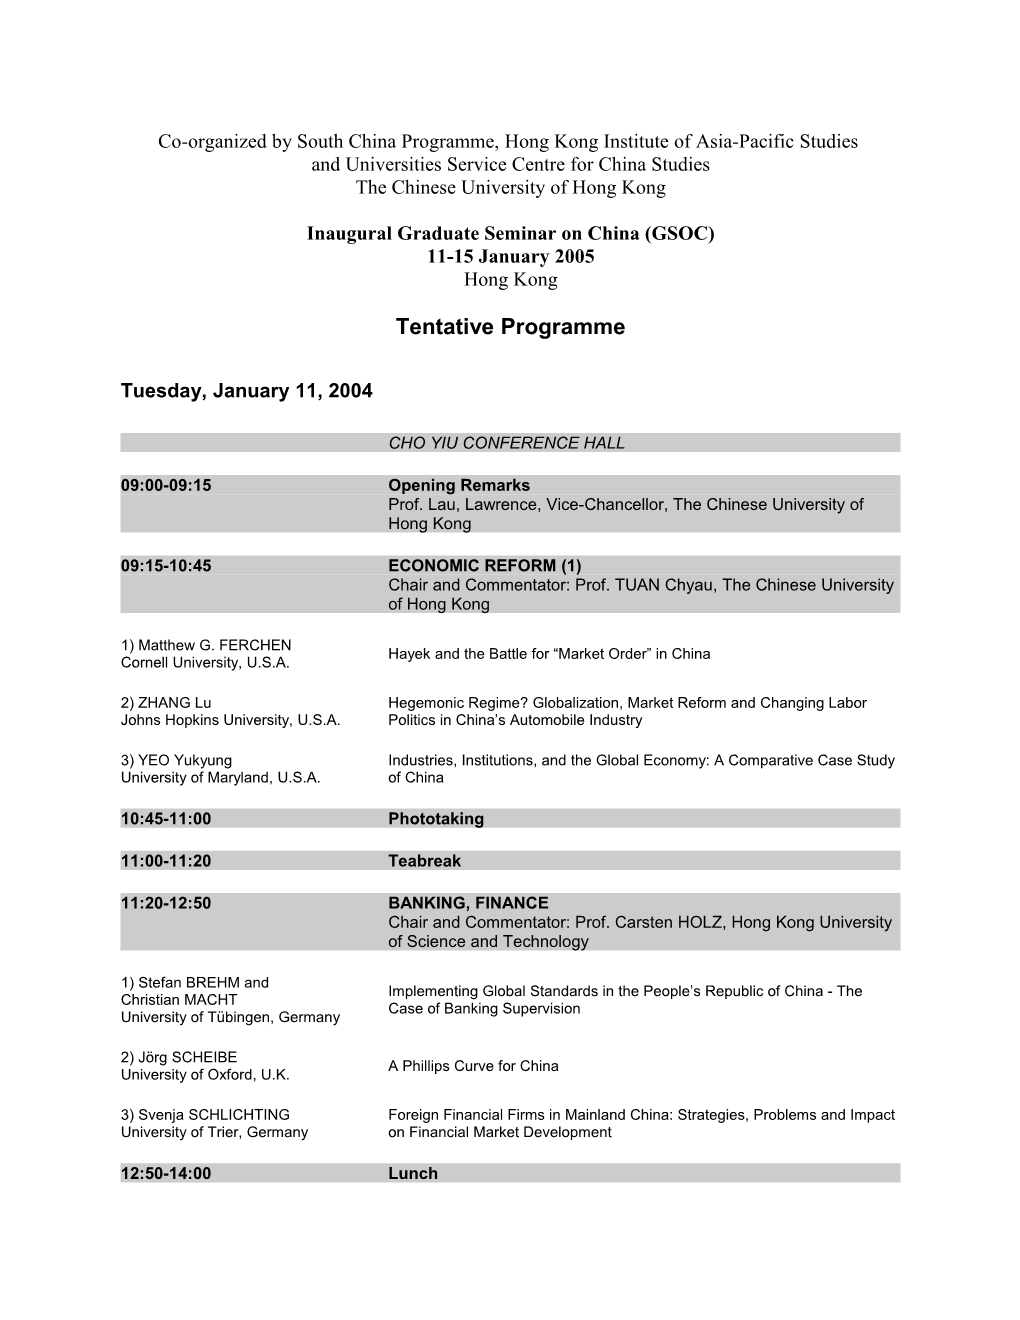 Co-Organized by South China Programme, Hong Kong Institute of Asia-Pacific Studies And